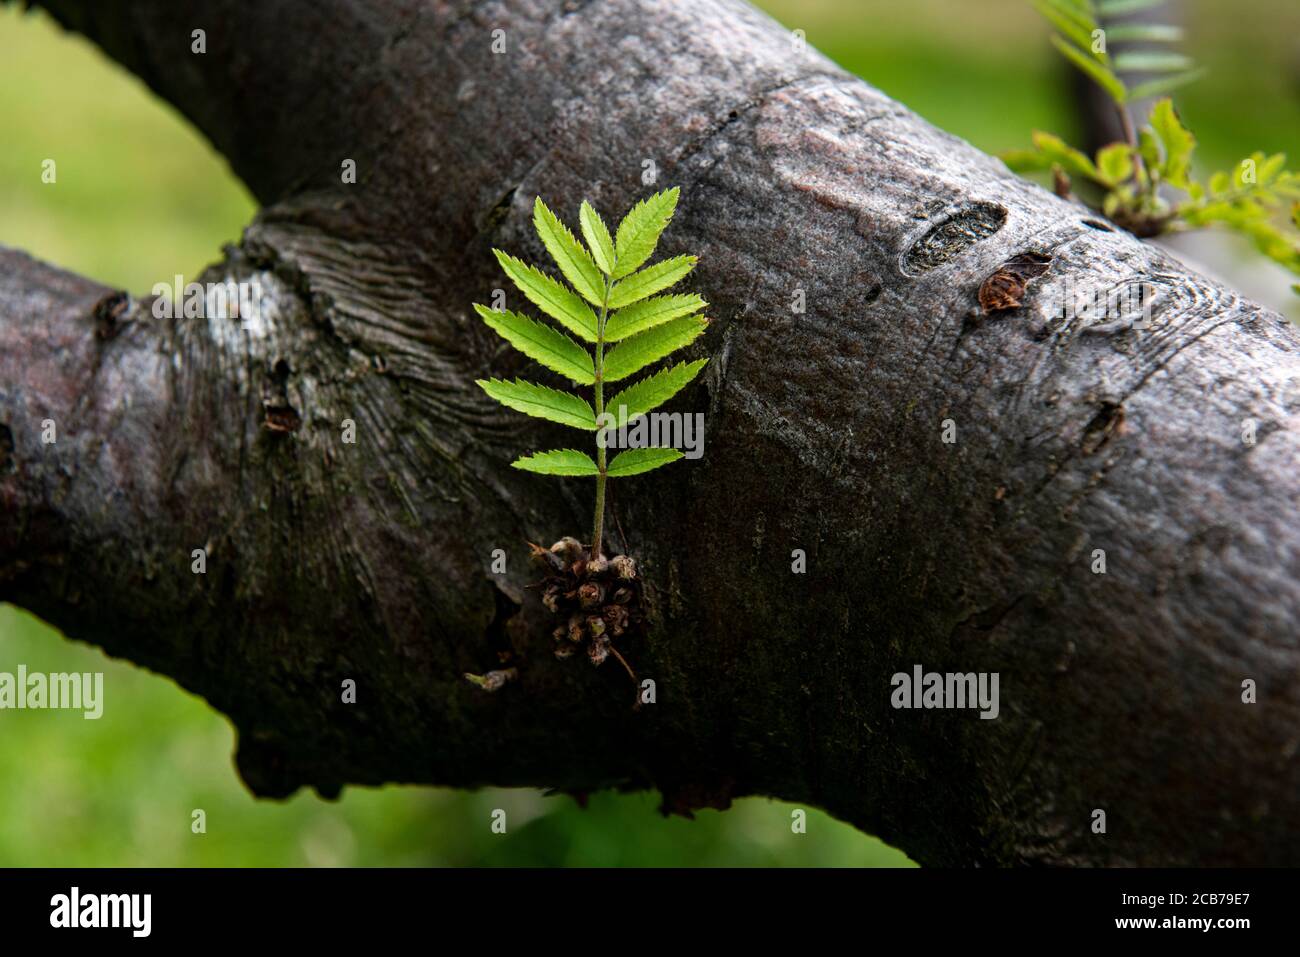 New green shoots growing on a tree trunk in a UK park. Stock Photo